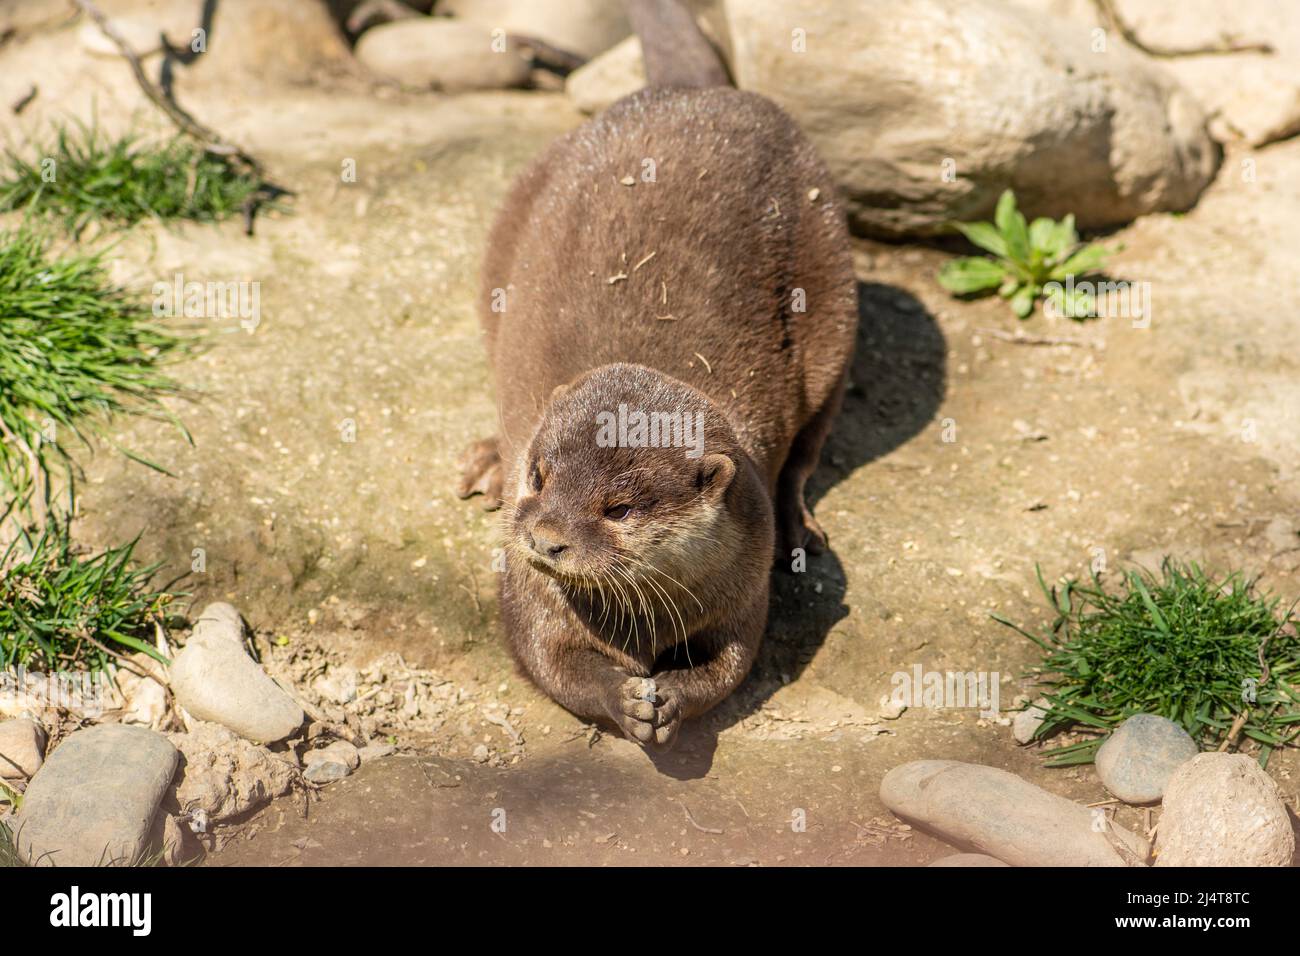 Otter near a river, carnivorous mammals in the subfamily Lutrinae. Semiaquatic, aquatic or marine, with diets based on fish and invertebrates, closeup Stock Photo